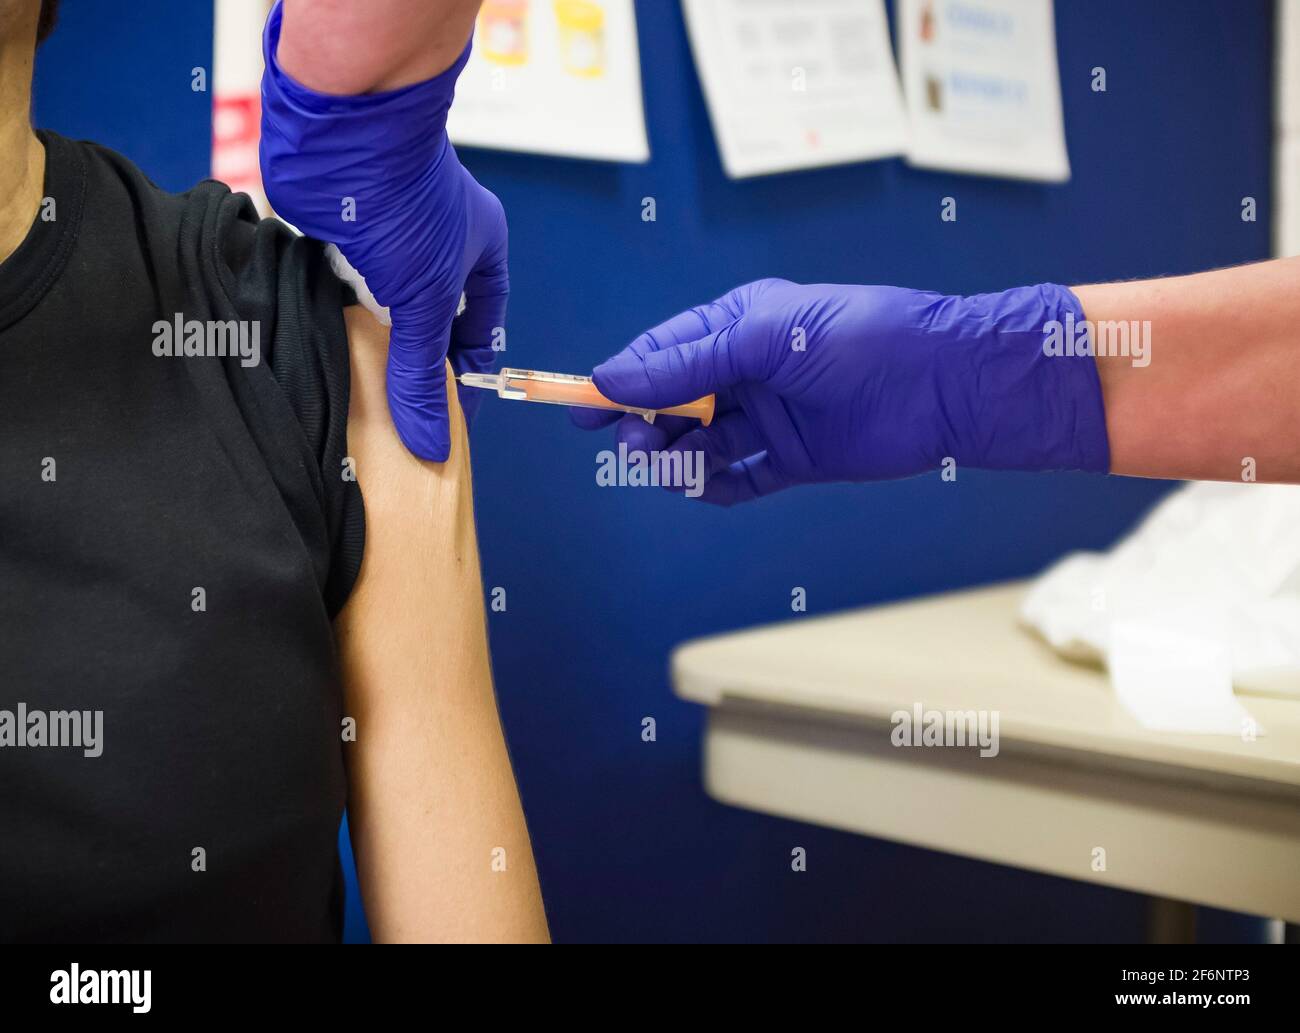 Closeup of British Asian woman getting injection in arm, Flu jab,  influenza or Covid 19 vaccine, UK Stock Photo